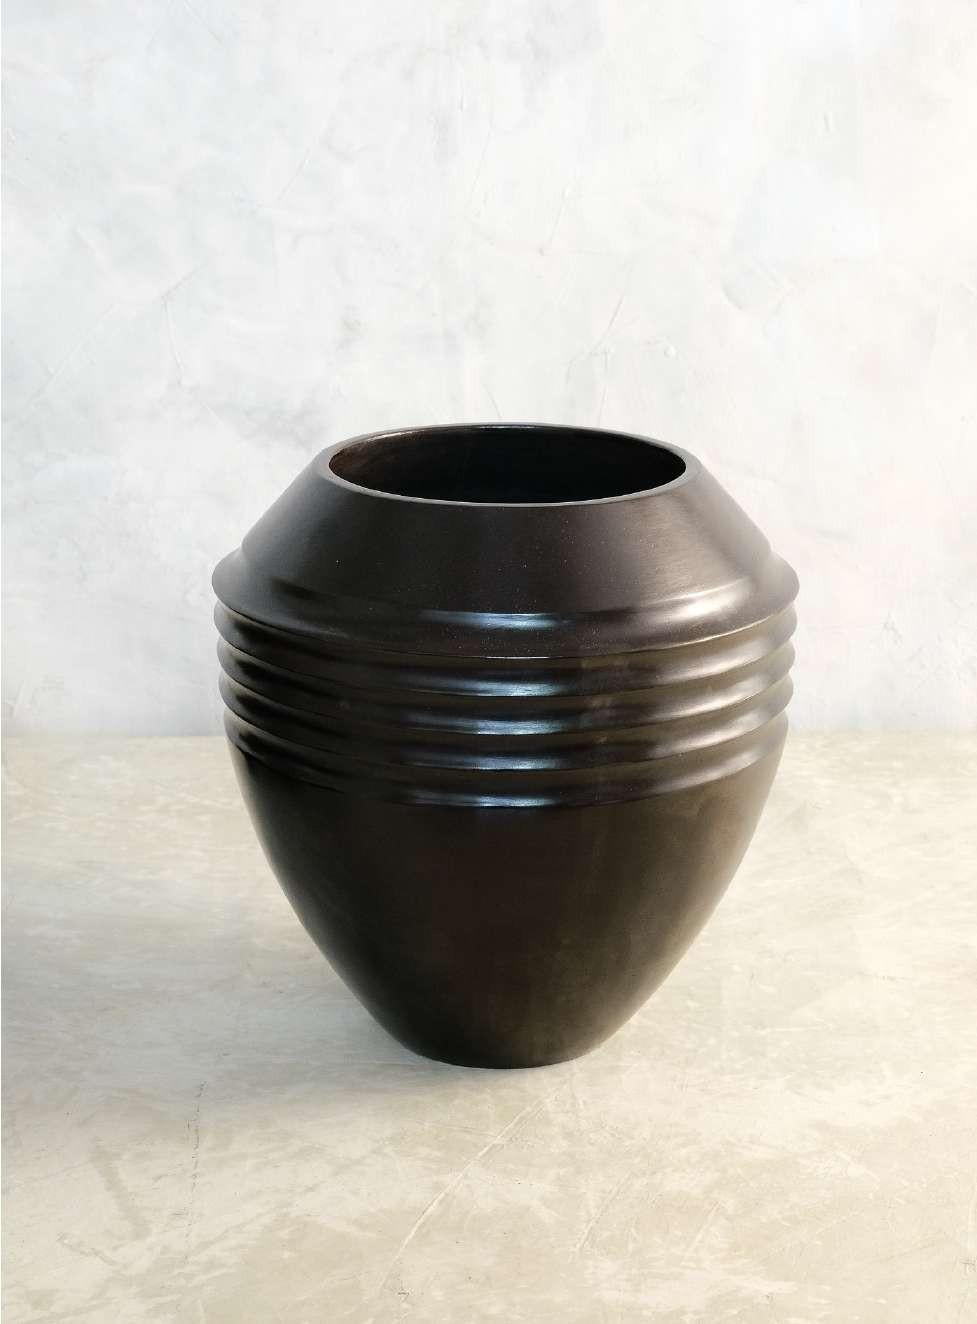 Cascabel vase by Onora
Dimensions: D 30 x H 28 cm
Materials: Clay

This collection reinterprets one of the oldest structural techniques in pottery, coiling, the vessels made with this technique are made from coils of clay positioned in